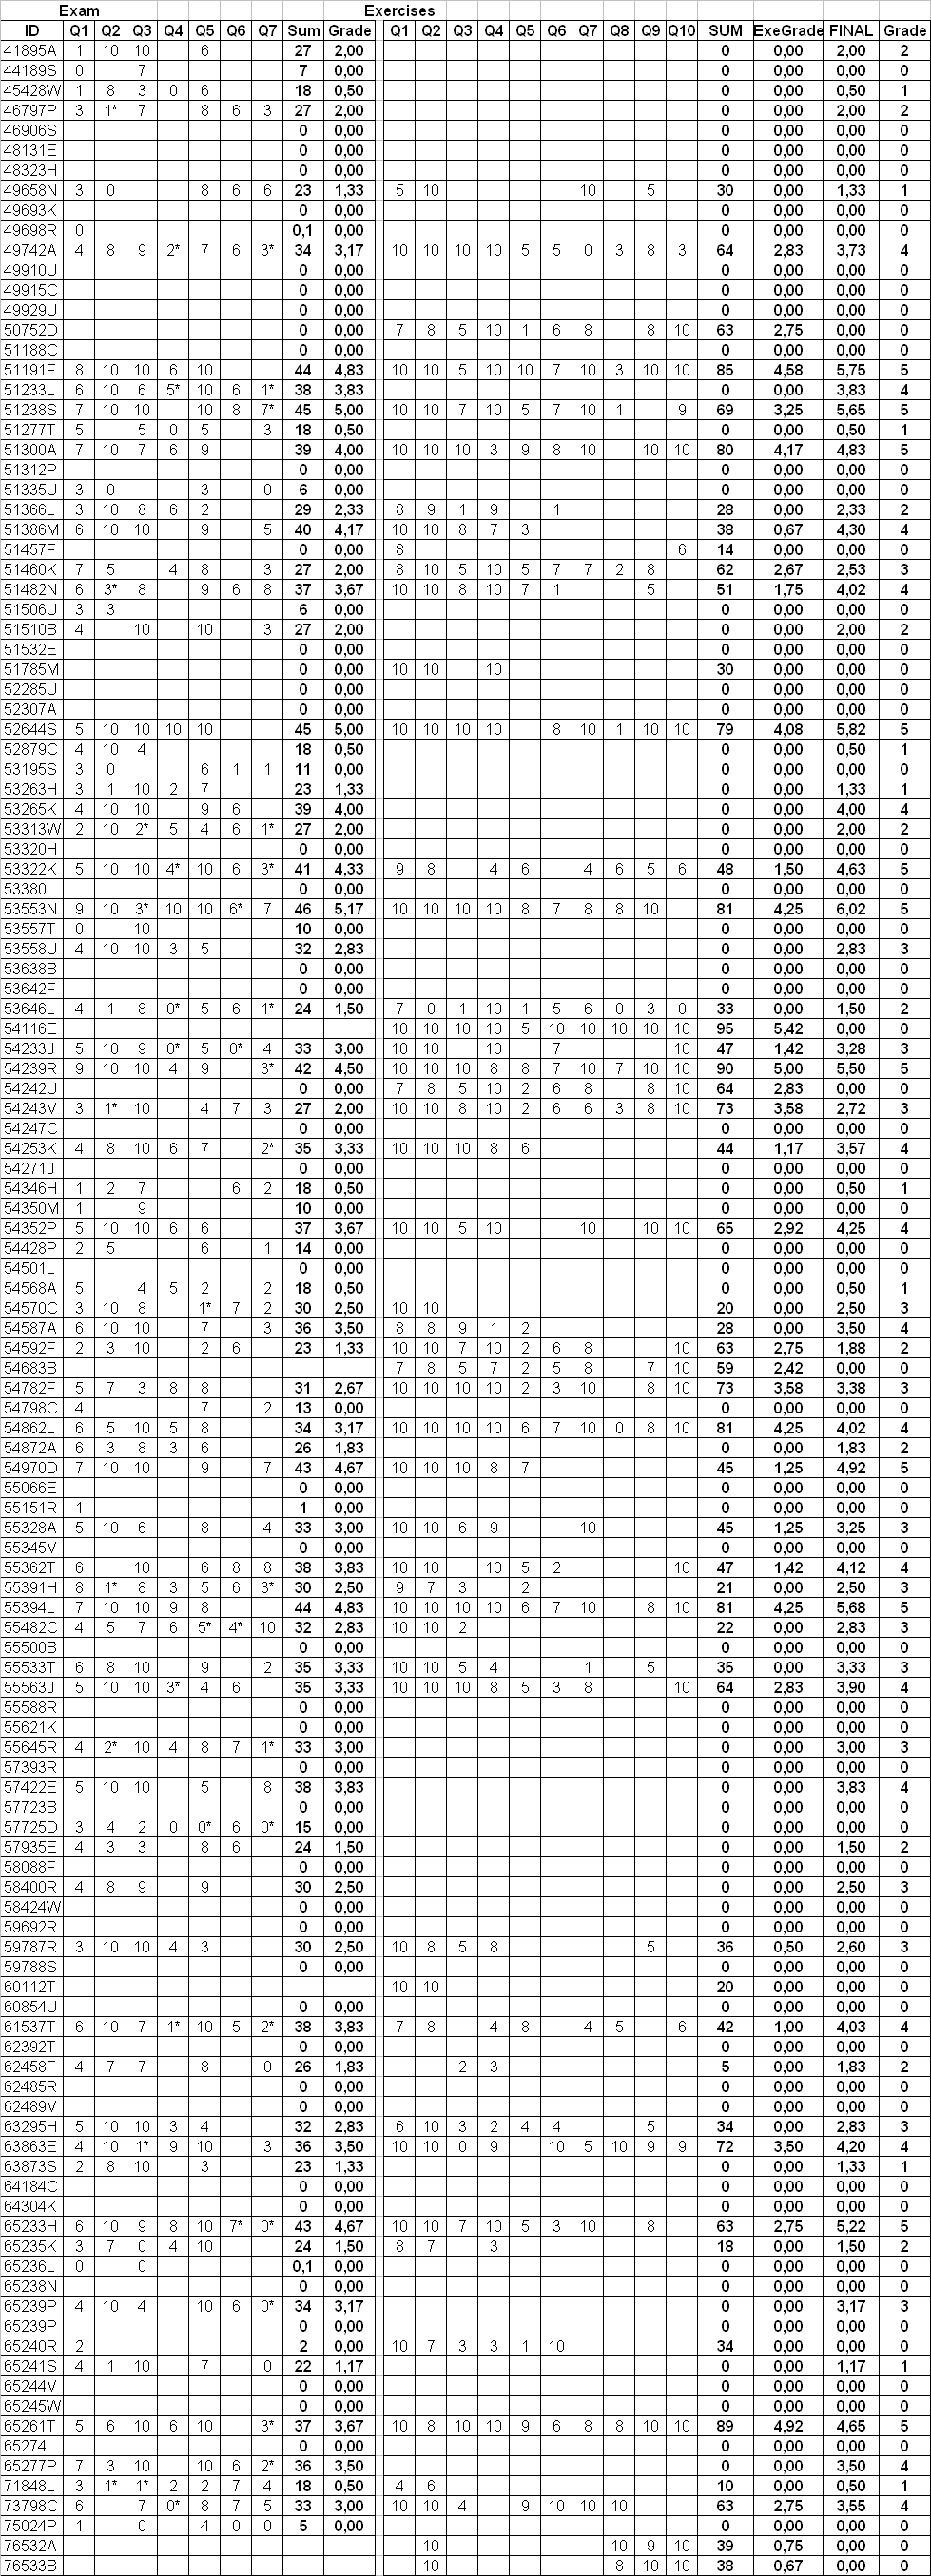 exam17122004results_and_exercises_final_grades_2004.png